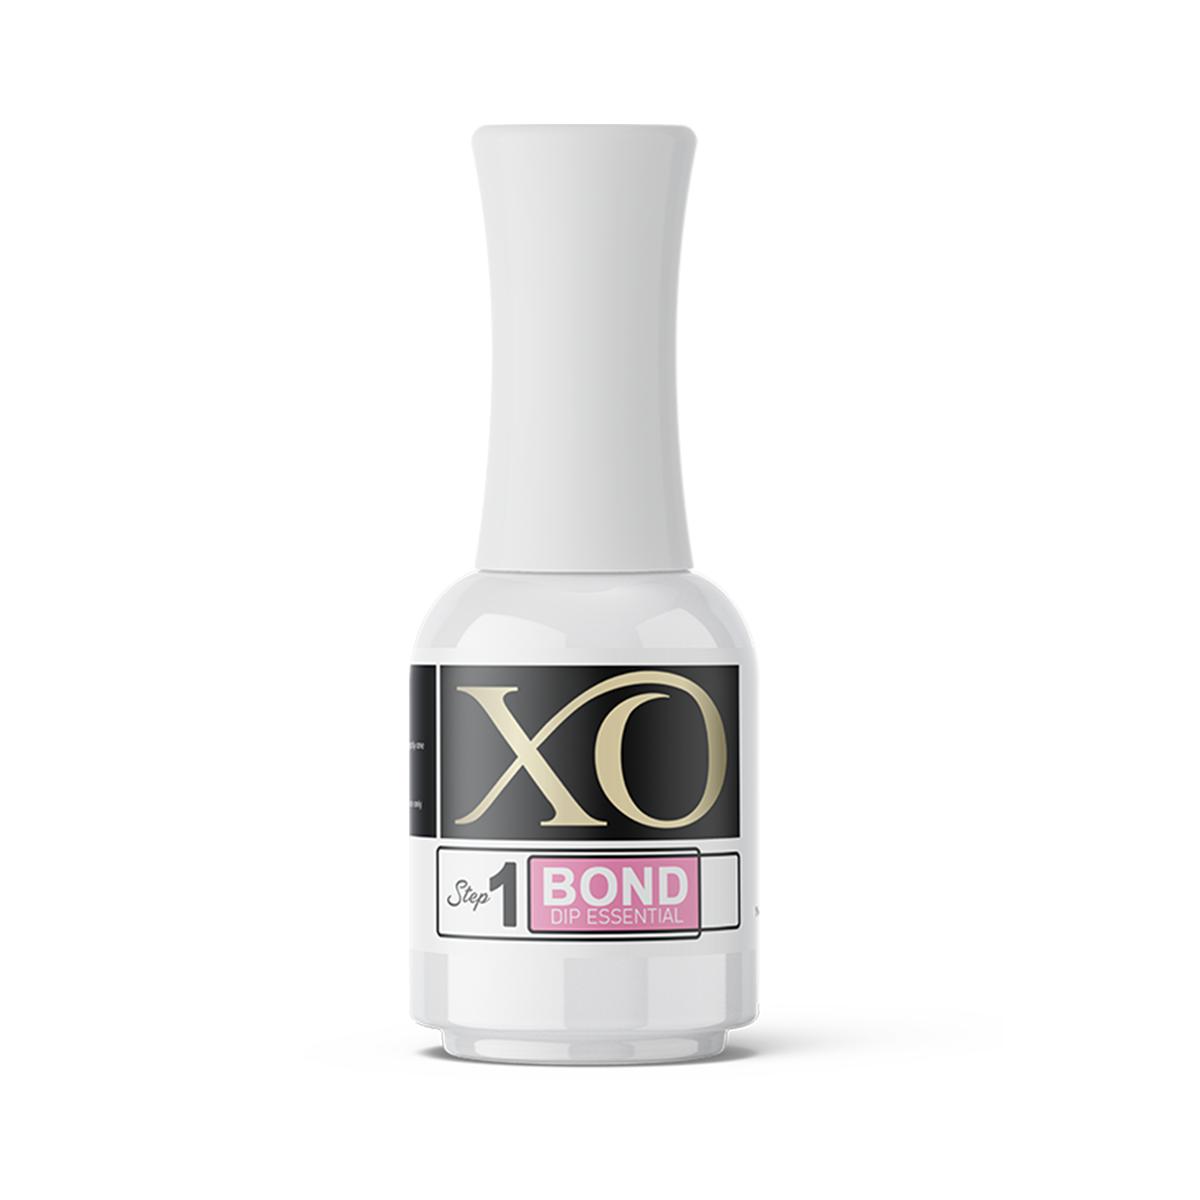 XO Dipping Essential - Bond Dip (0.5oz/15ml) for Dipping Manicures-Nails Deal & Beauty Supply- Nail Supply American Gel Polish - Phuong Ni